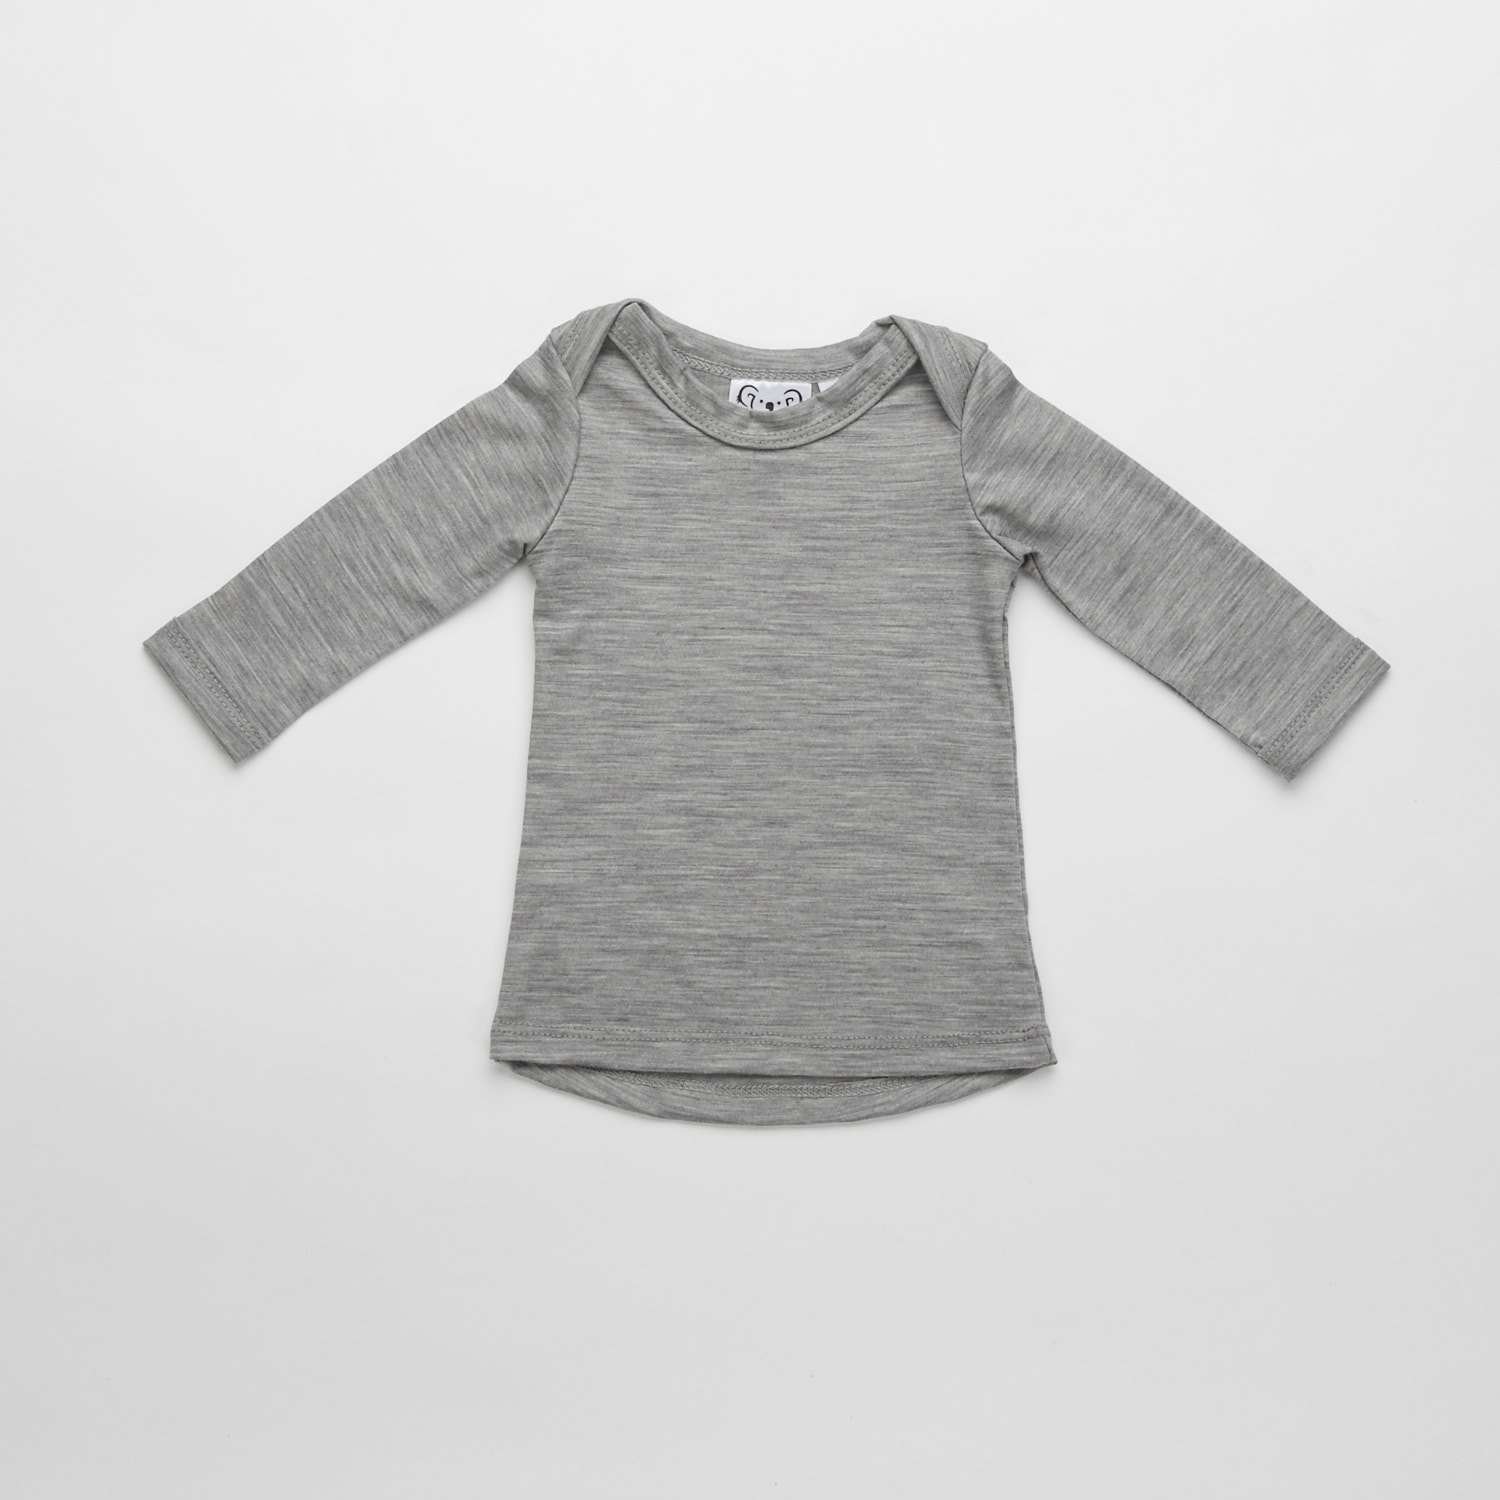 Merino Wool Baby Clothing - The Australian Made Campaign